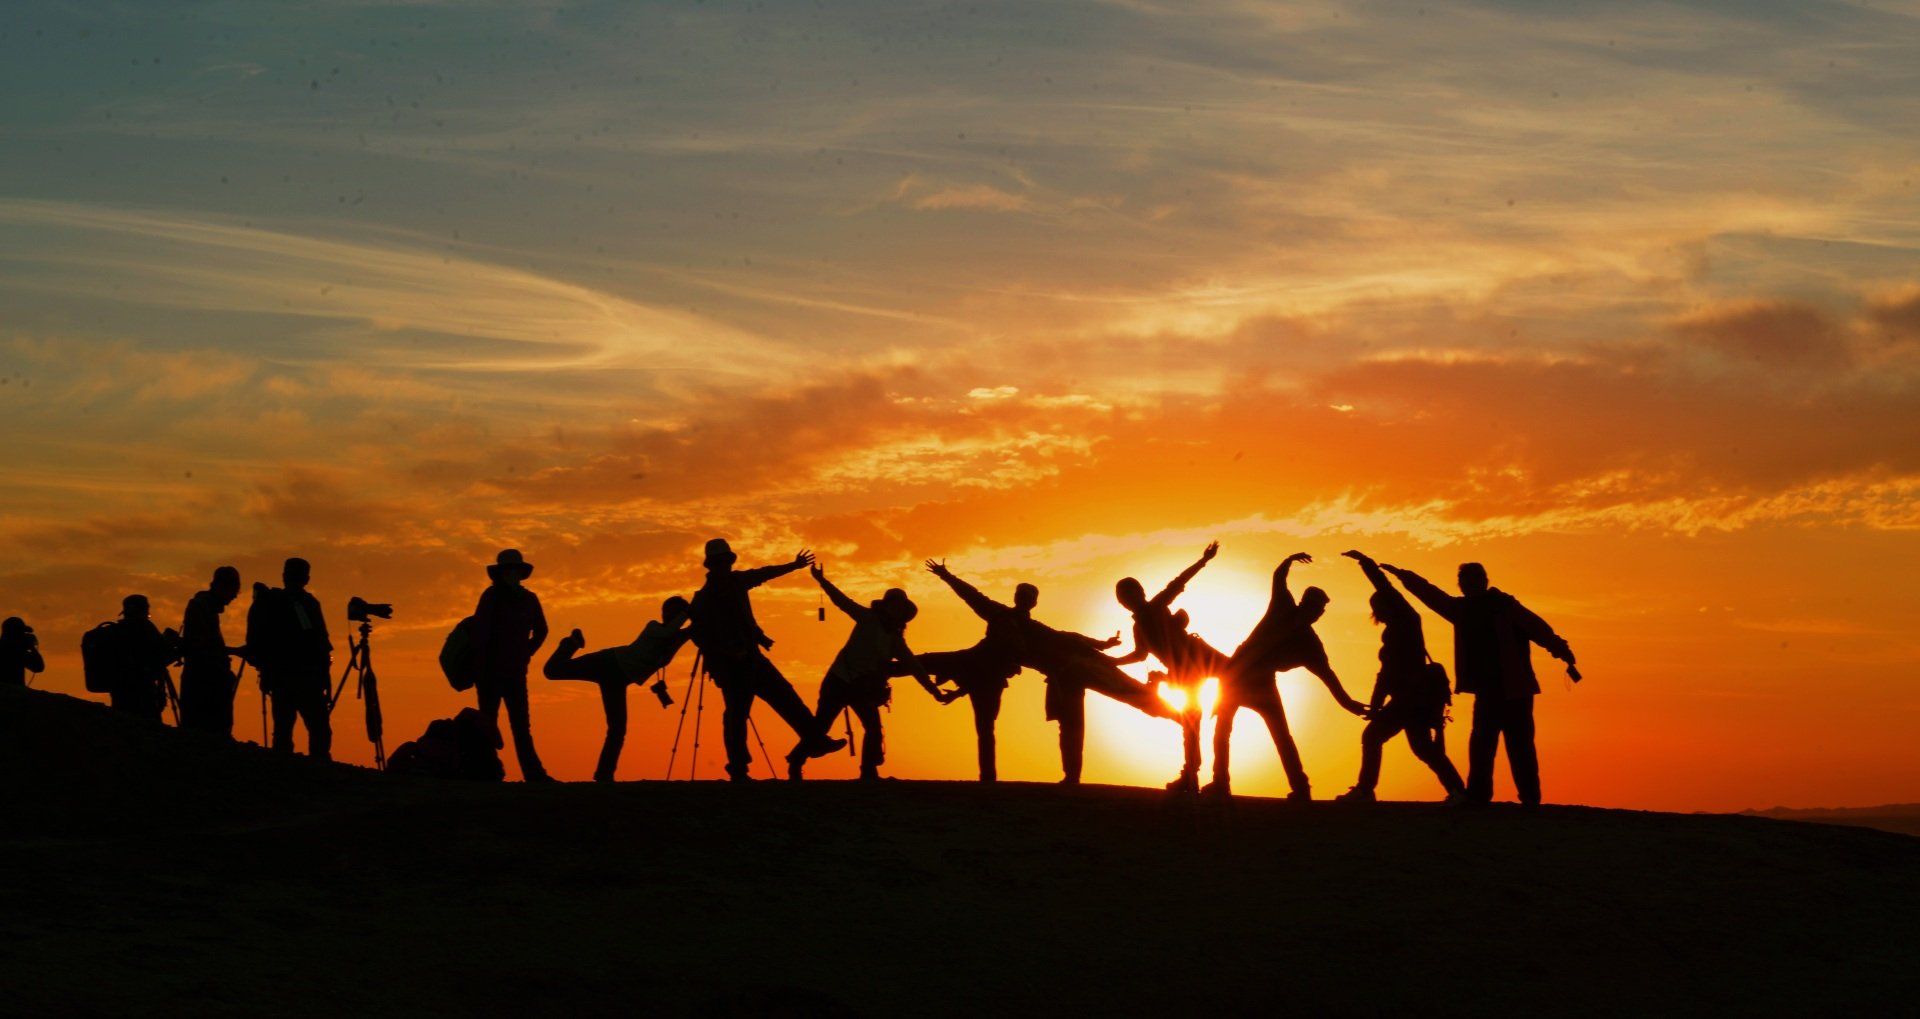 A group of people are standing in a row holding hands at sunset.